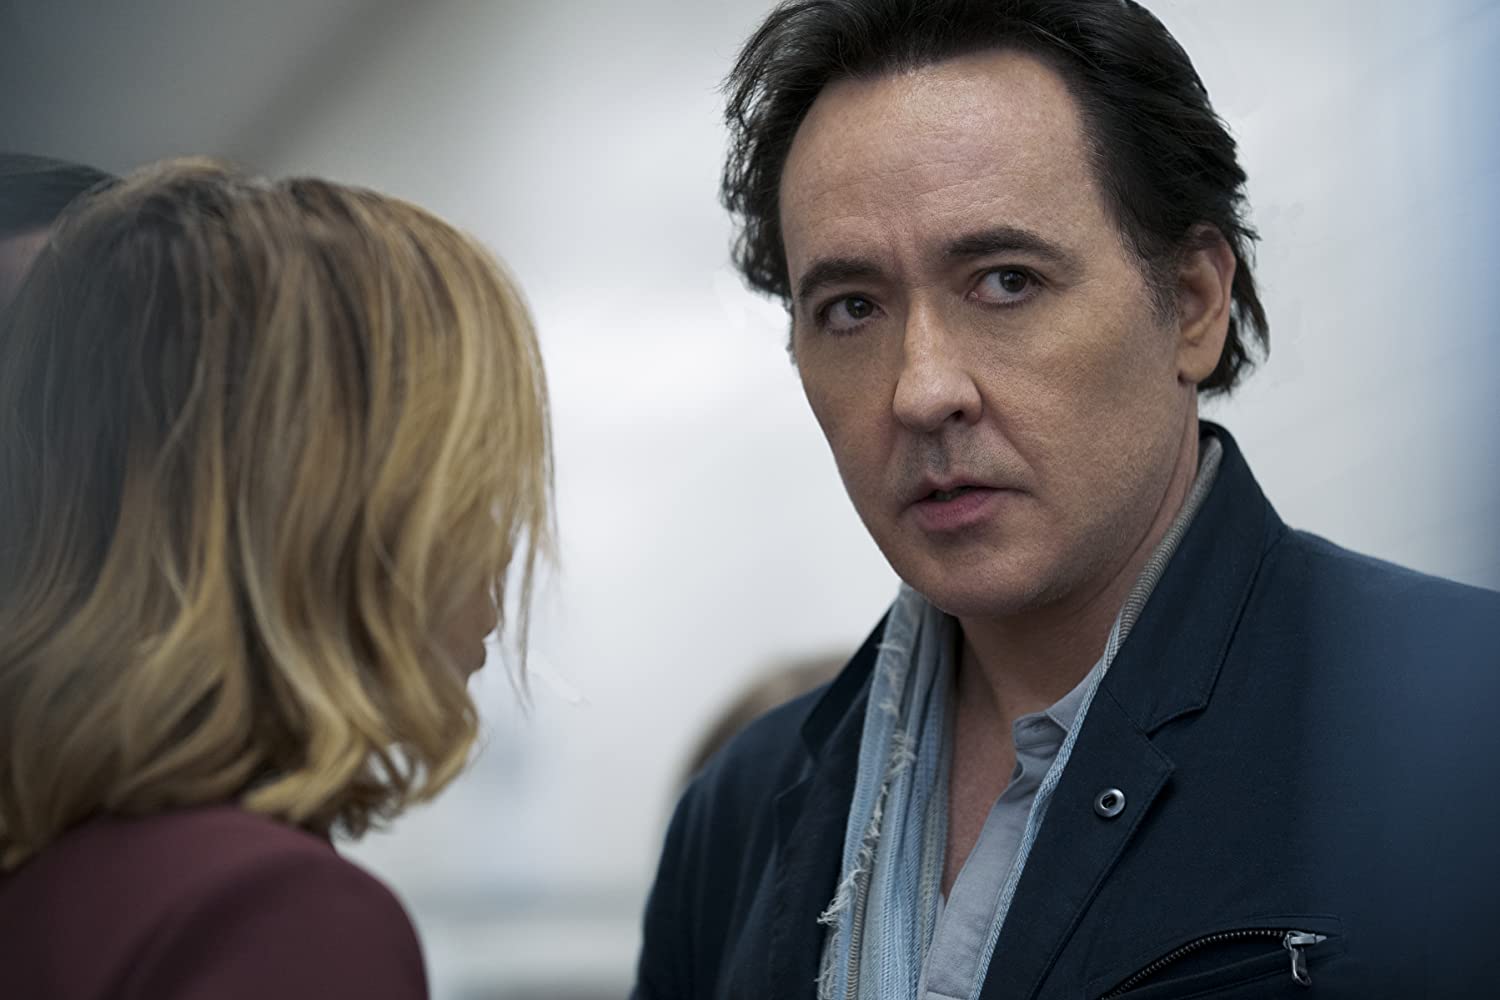 John Cusack is seen standing with a woman in a still from Amazon's Utopia.